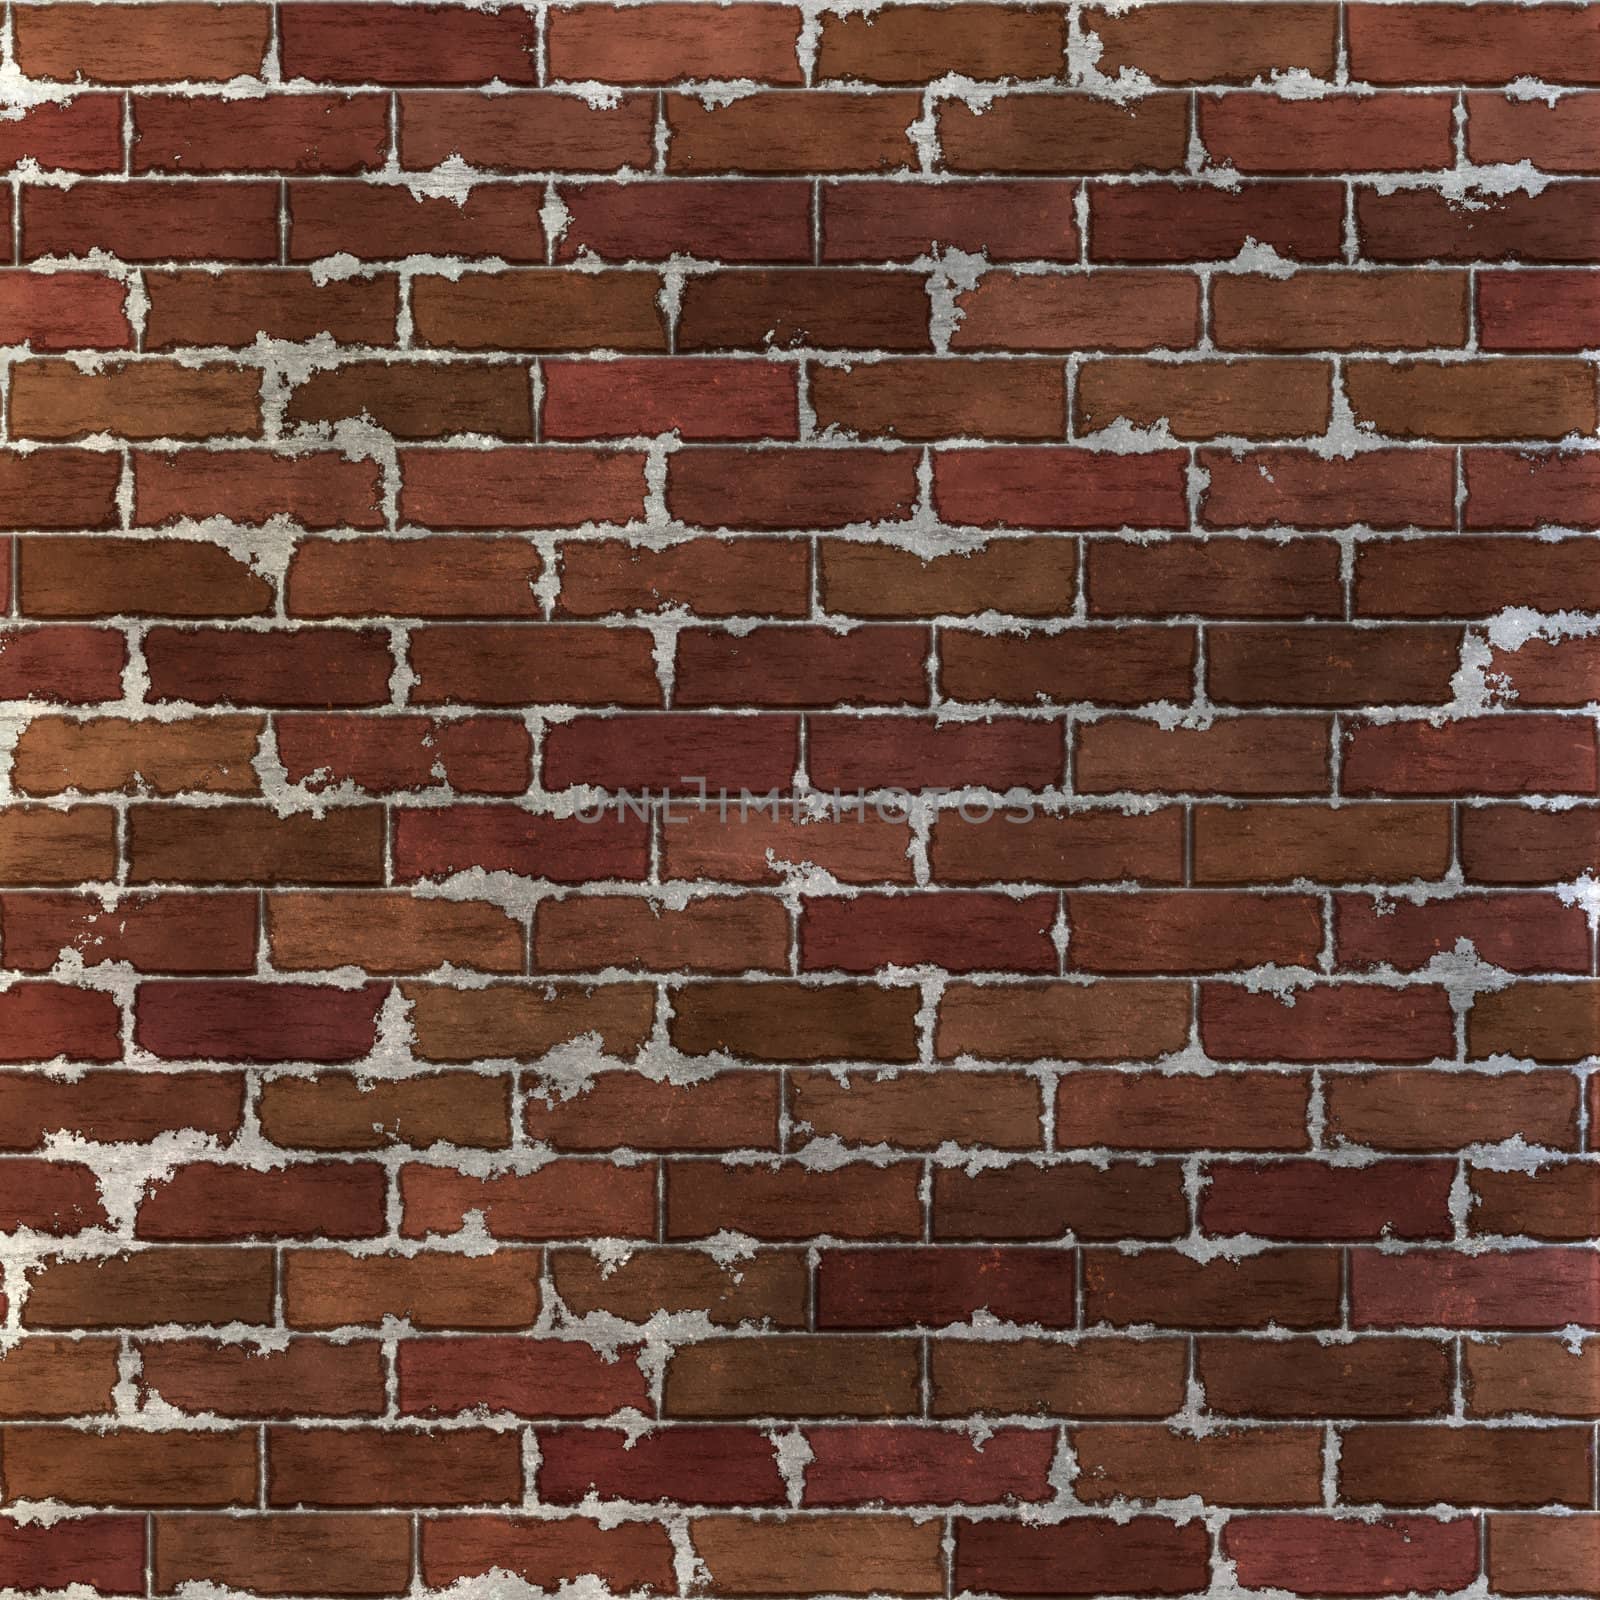 Seamless Brick Wall Pattern by graficallyminded